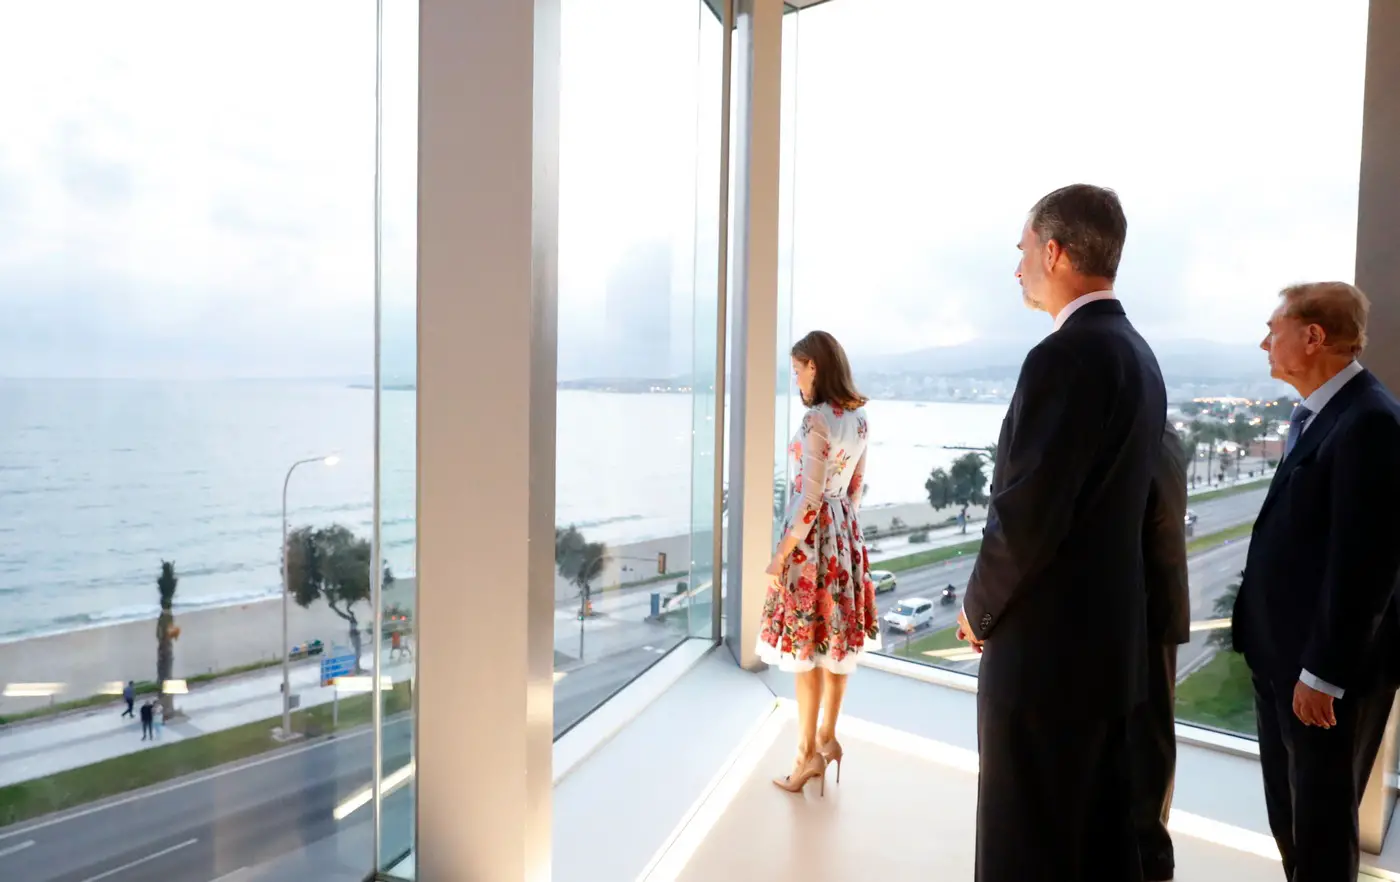 King Felipe and Queen Letizia inaugurated new palace in their holiday heaven Palma